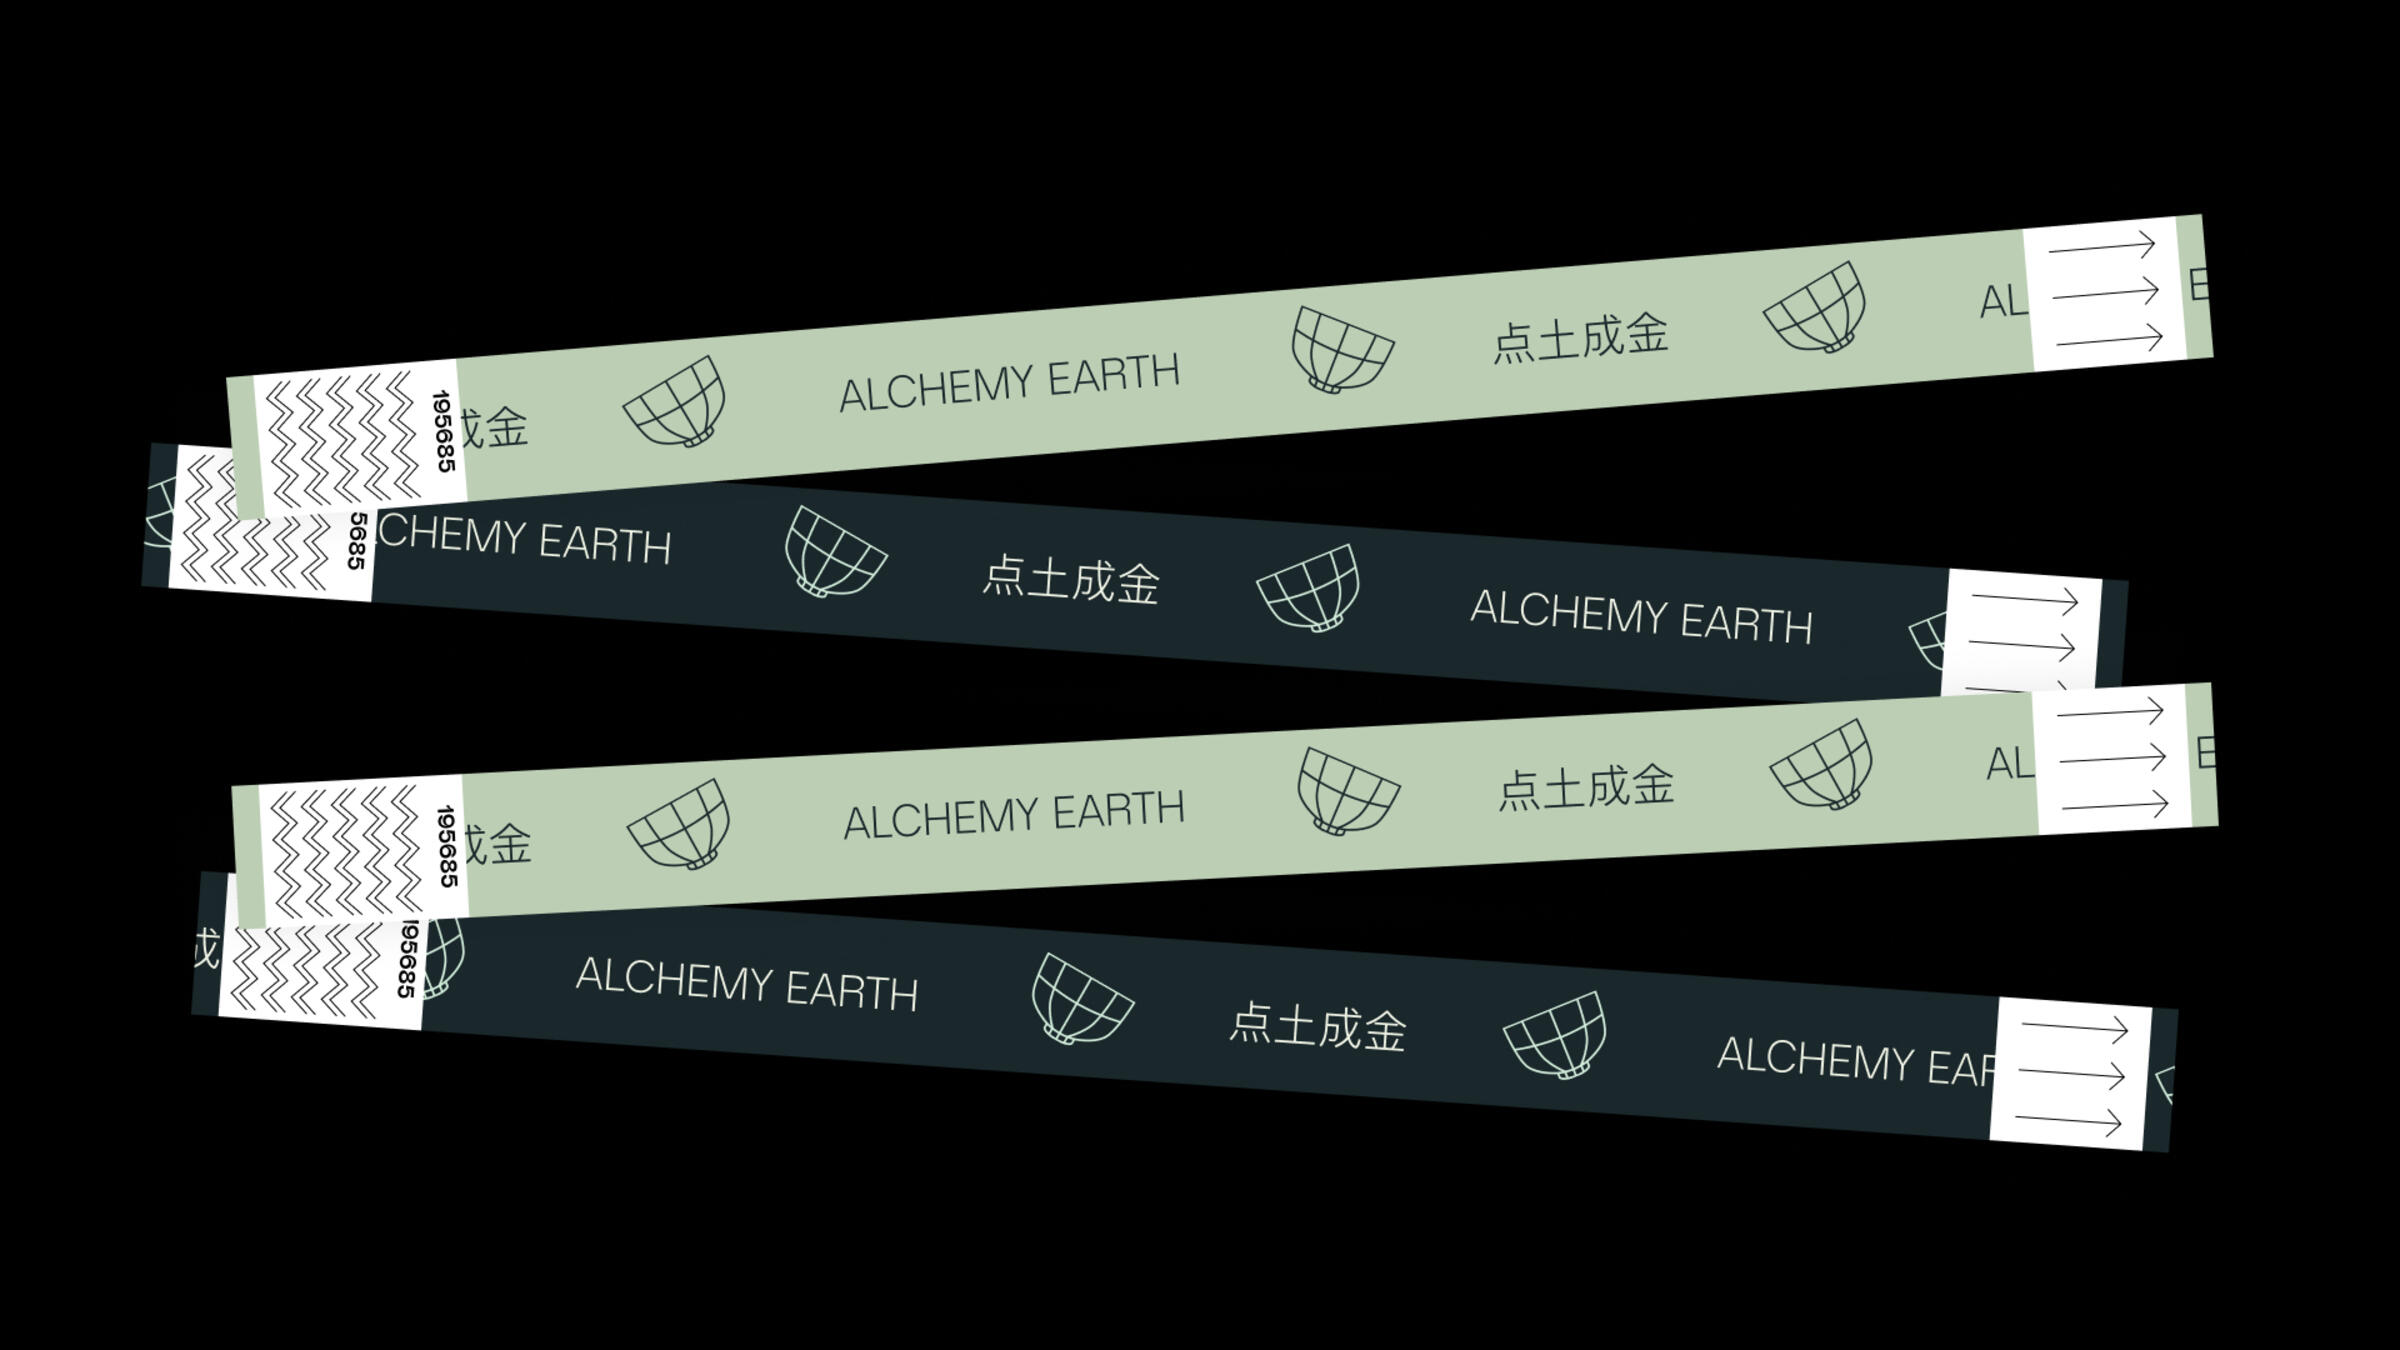 Ticket wristbands for Alchemy Earth